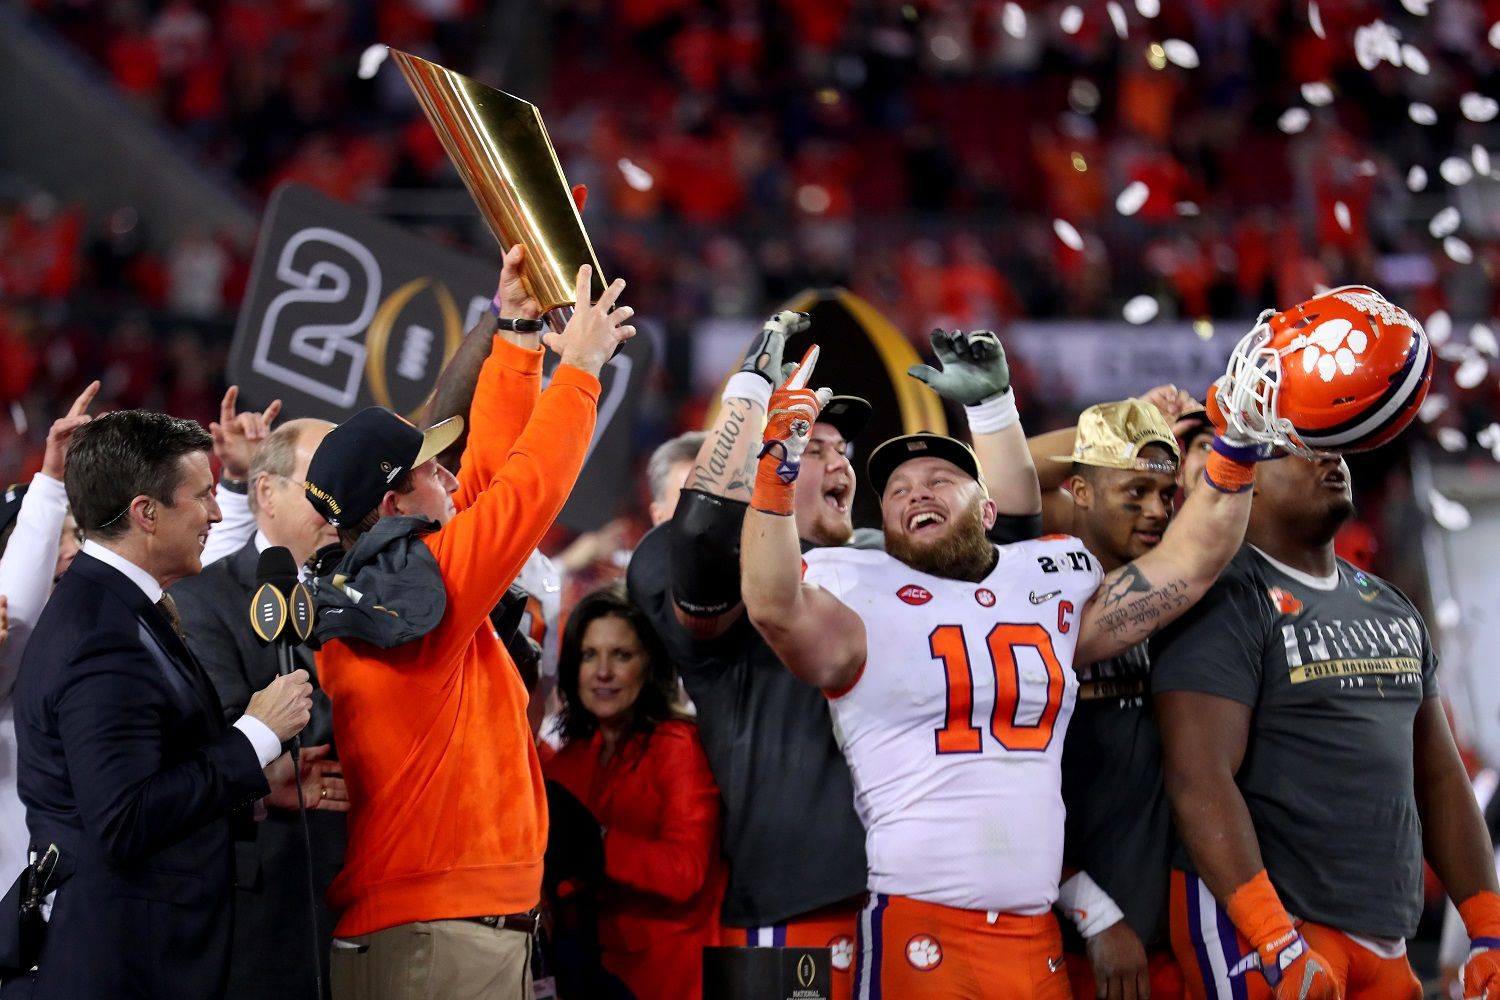 TAMPA, FL - JANUARY 09:  Head coach Dabo Swinney of the Clemson Tigers (L) and linebacker Ben Boulware #10 celebrate after defeating the Alabama Crimson Tide 35-31 to win the 2017 College Football Playoff National Championship Game at Raymond James Stadium on January 9, 2017 in Tampa, Florida.  (Photo by Tom Pennington/Getty Images)